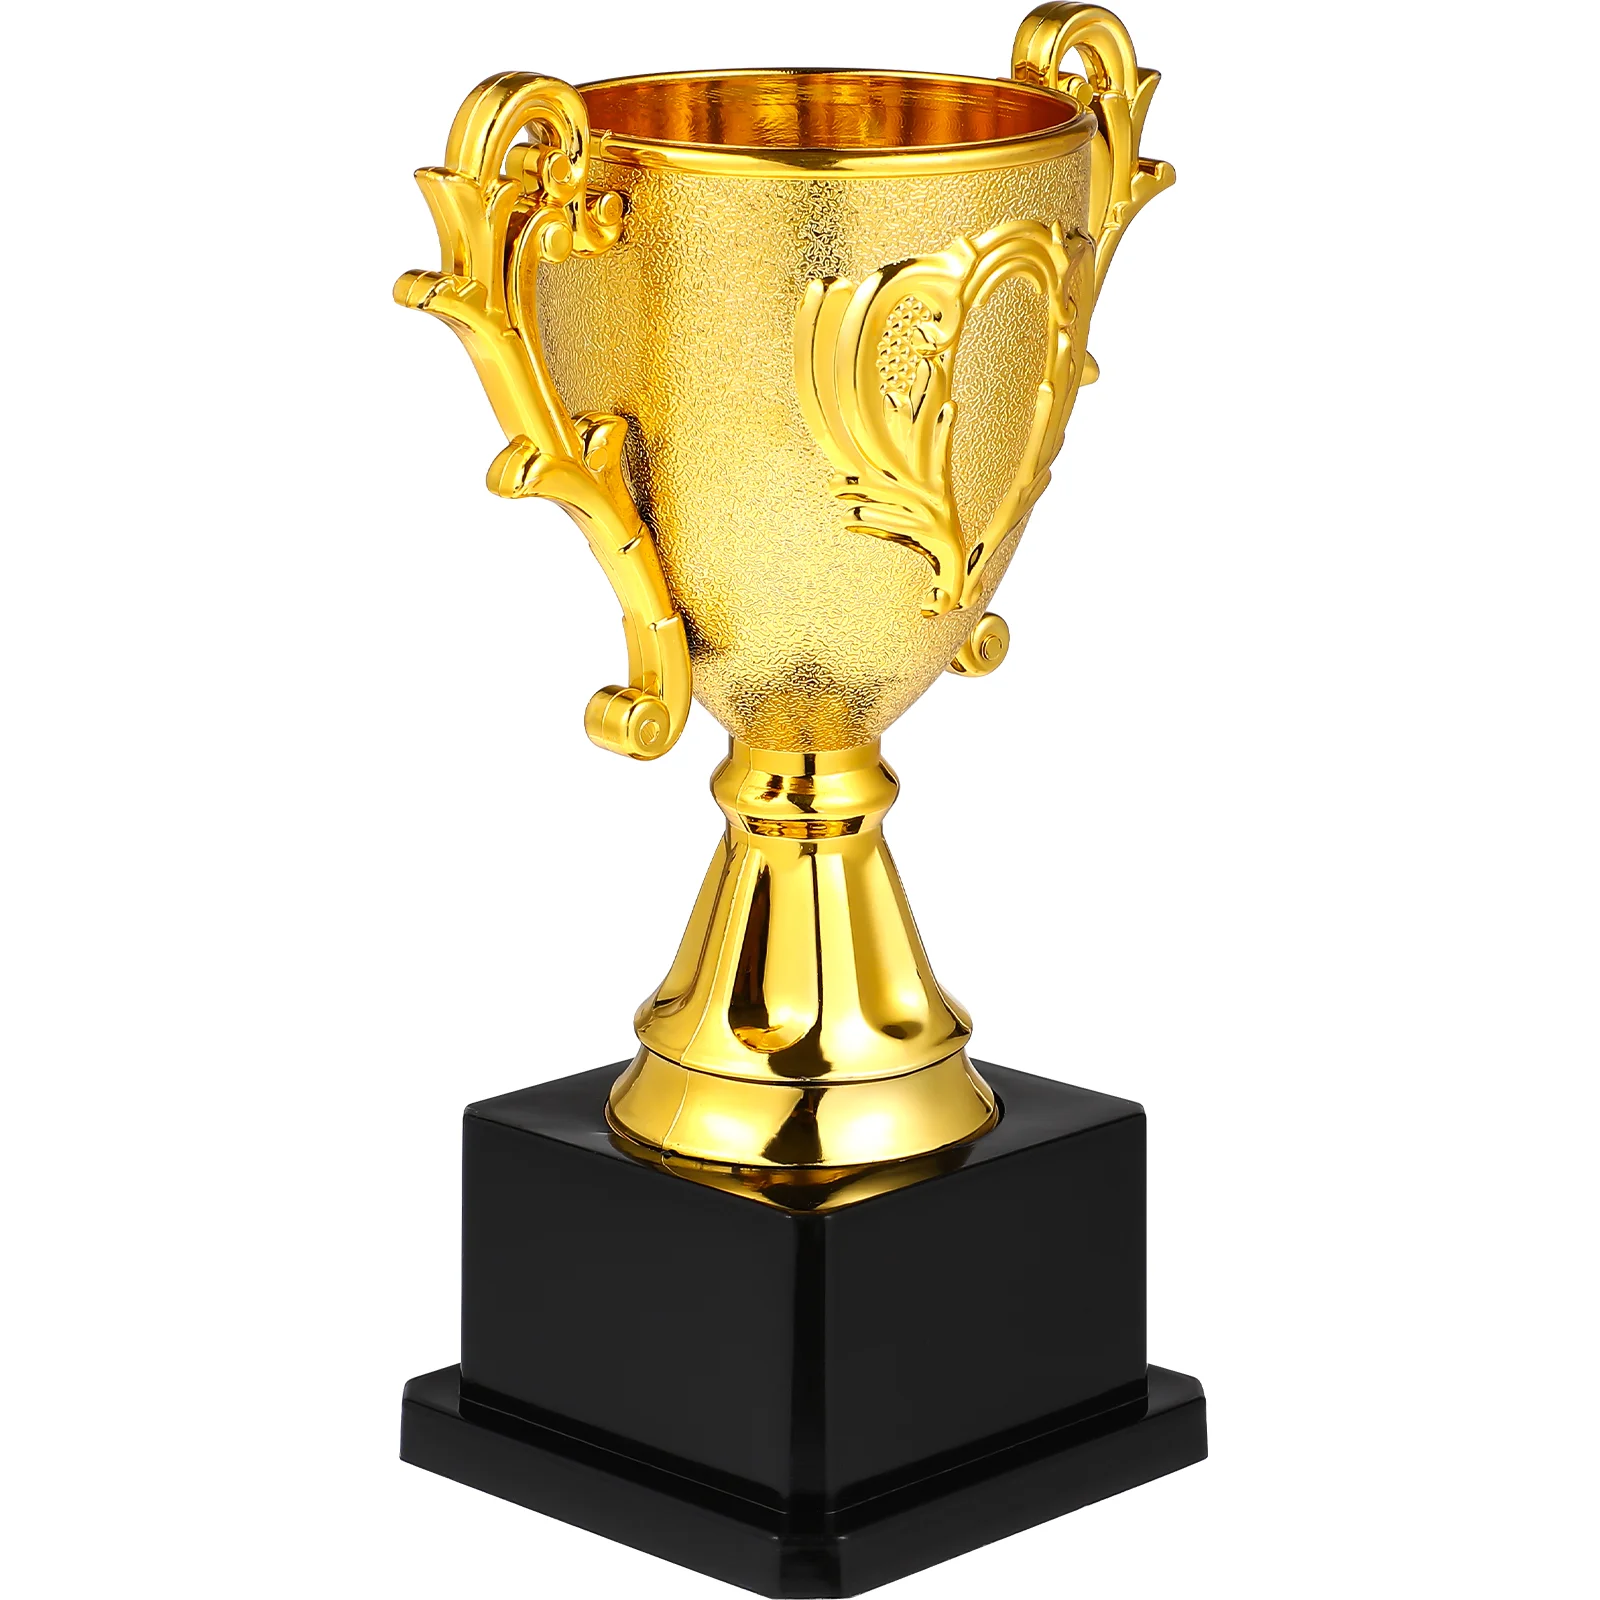 

Trophies Reward Competition Trophy Award Winner Toy Cup Tournaments Plastic Awards Kids Gifts